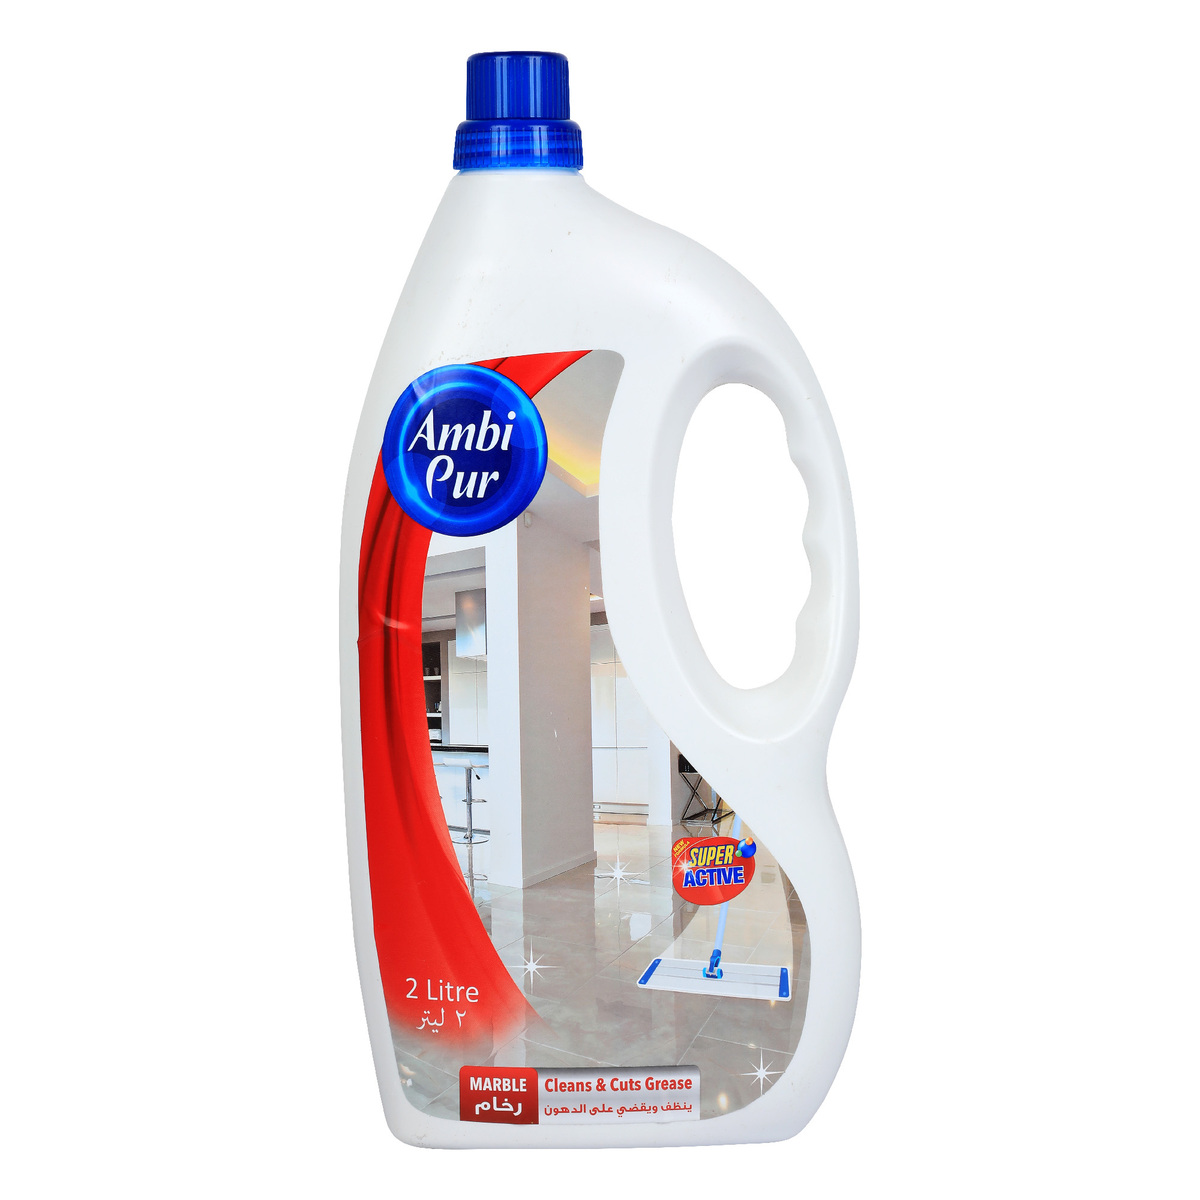 Ambi Pur Marble Floor Cleaner 2Litre